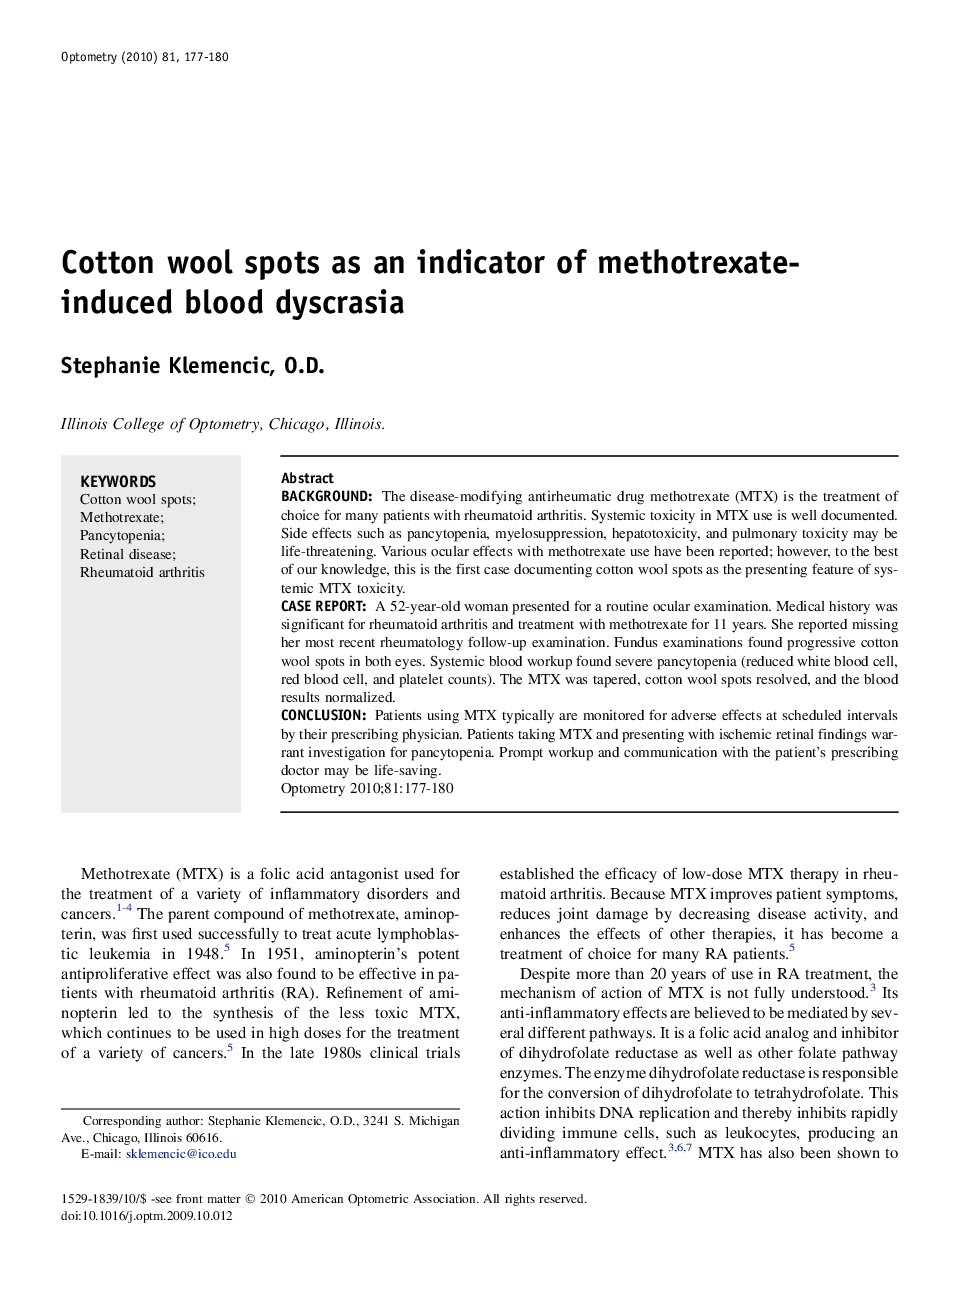 Cotton wool spots as an indicator of methotrexate-induced blood dyscrasia